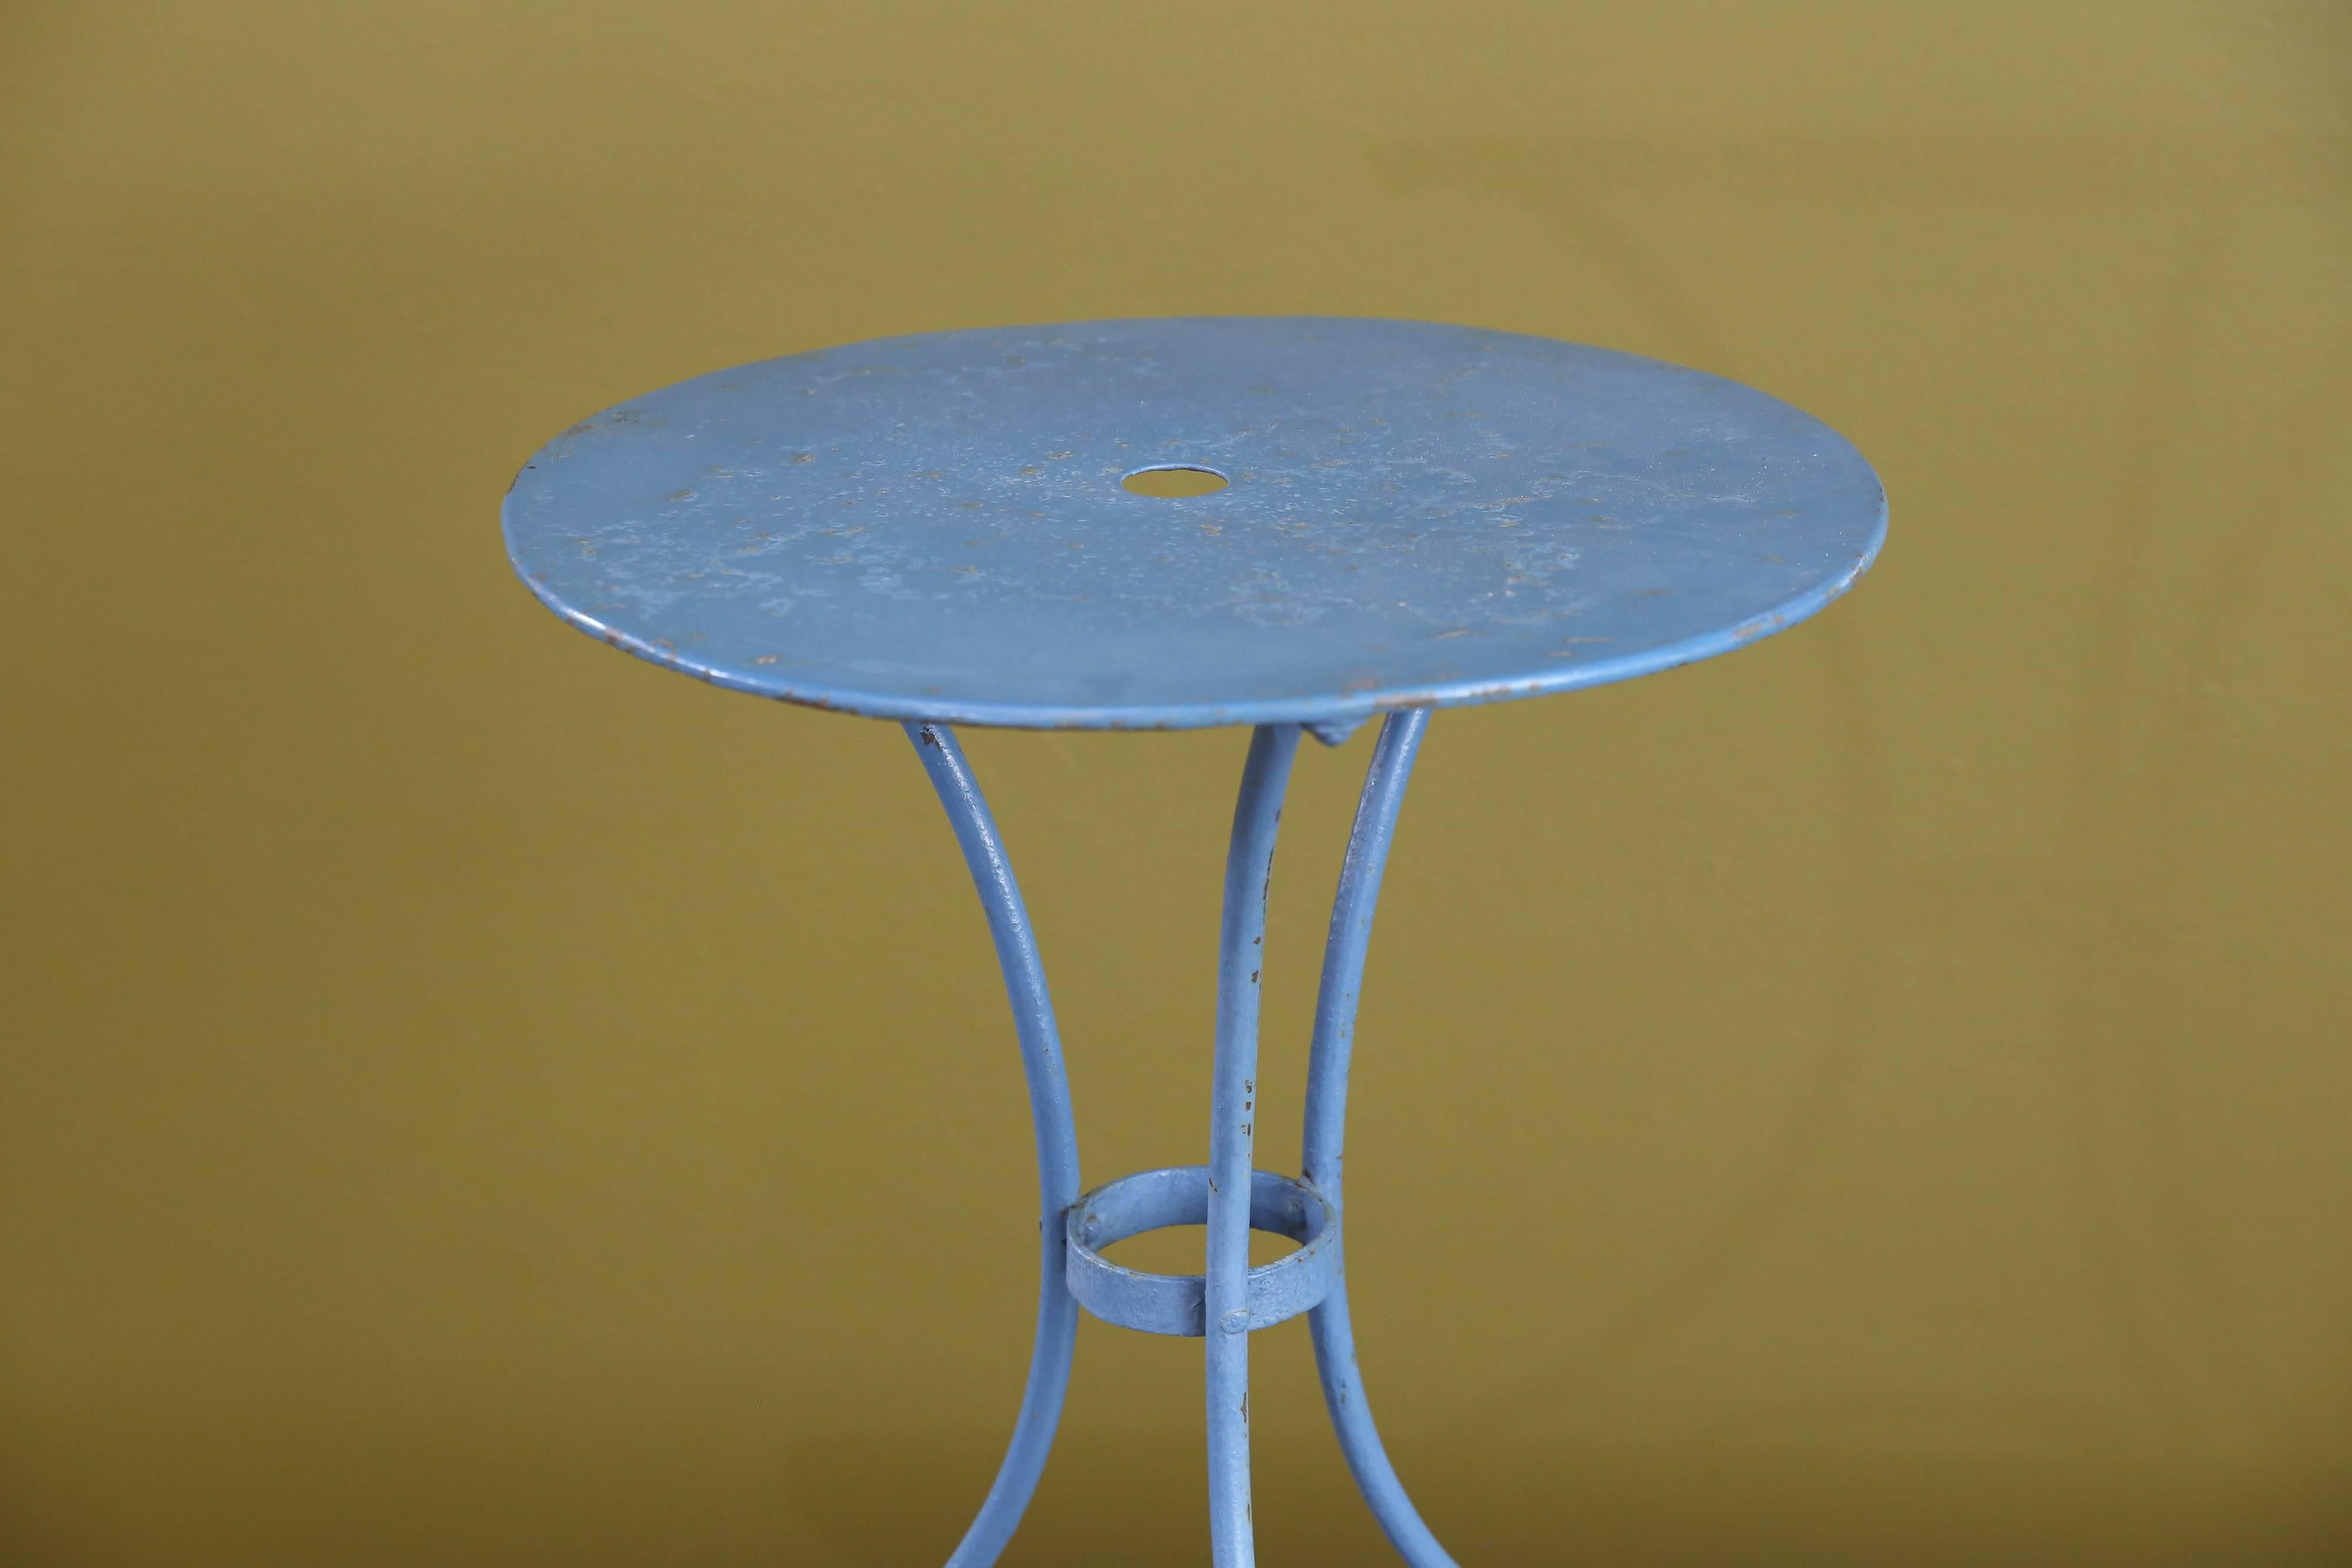 Vintage metal bistro table from France, circa 1960. Original blue paint and parts. Would make a great bedside table.